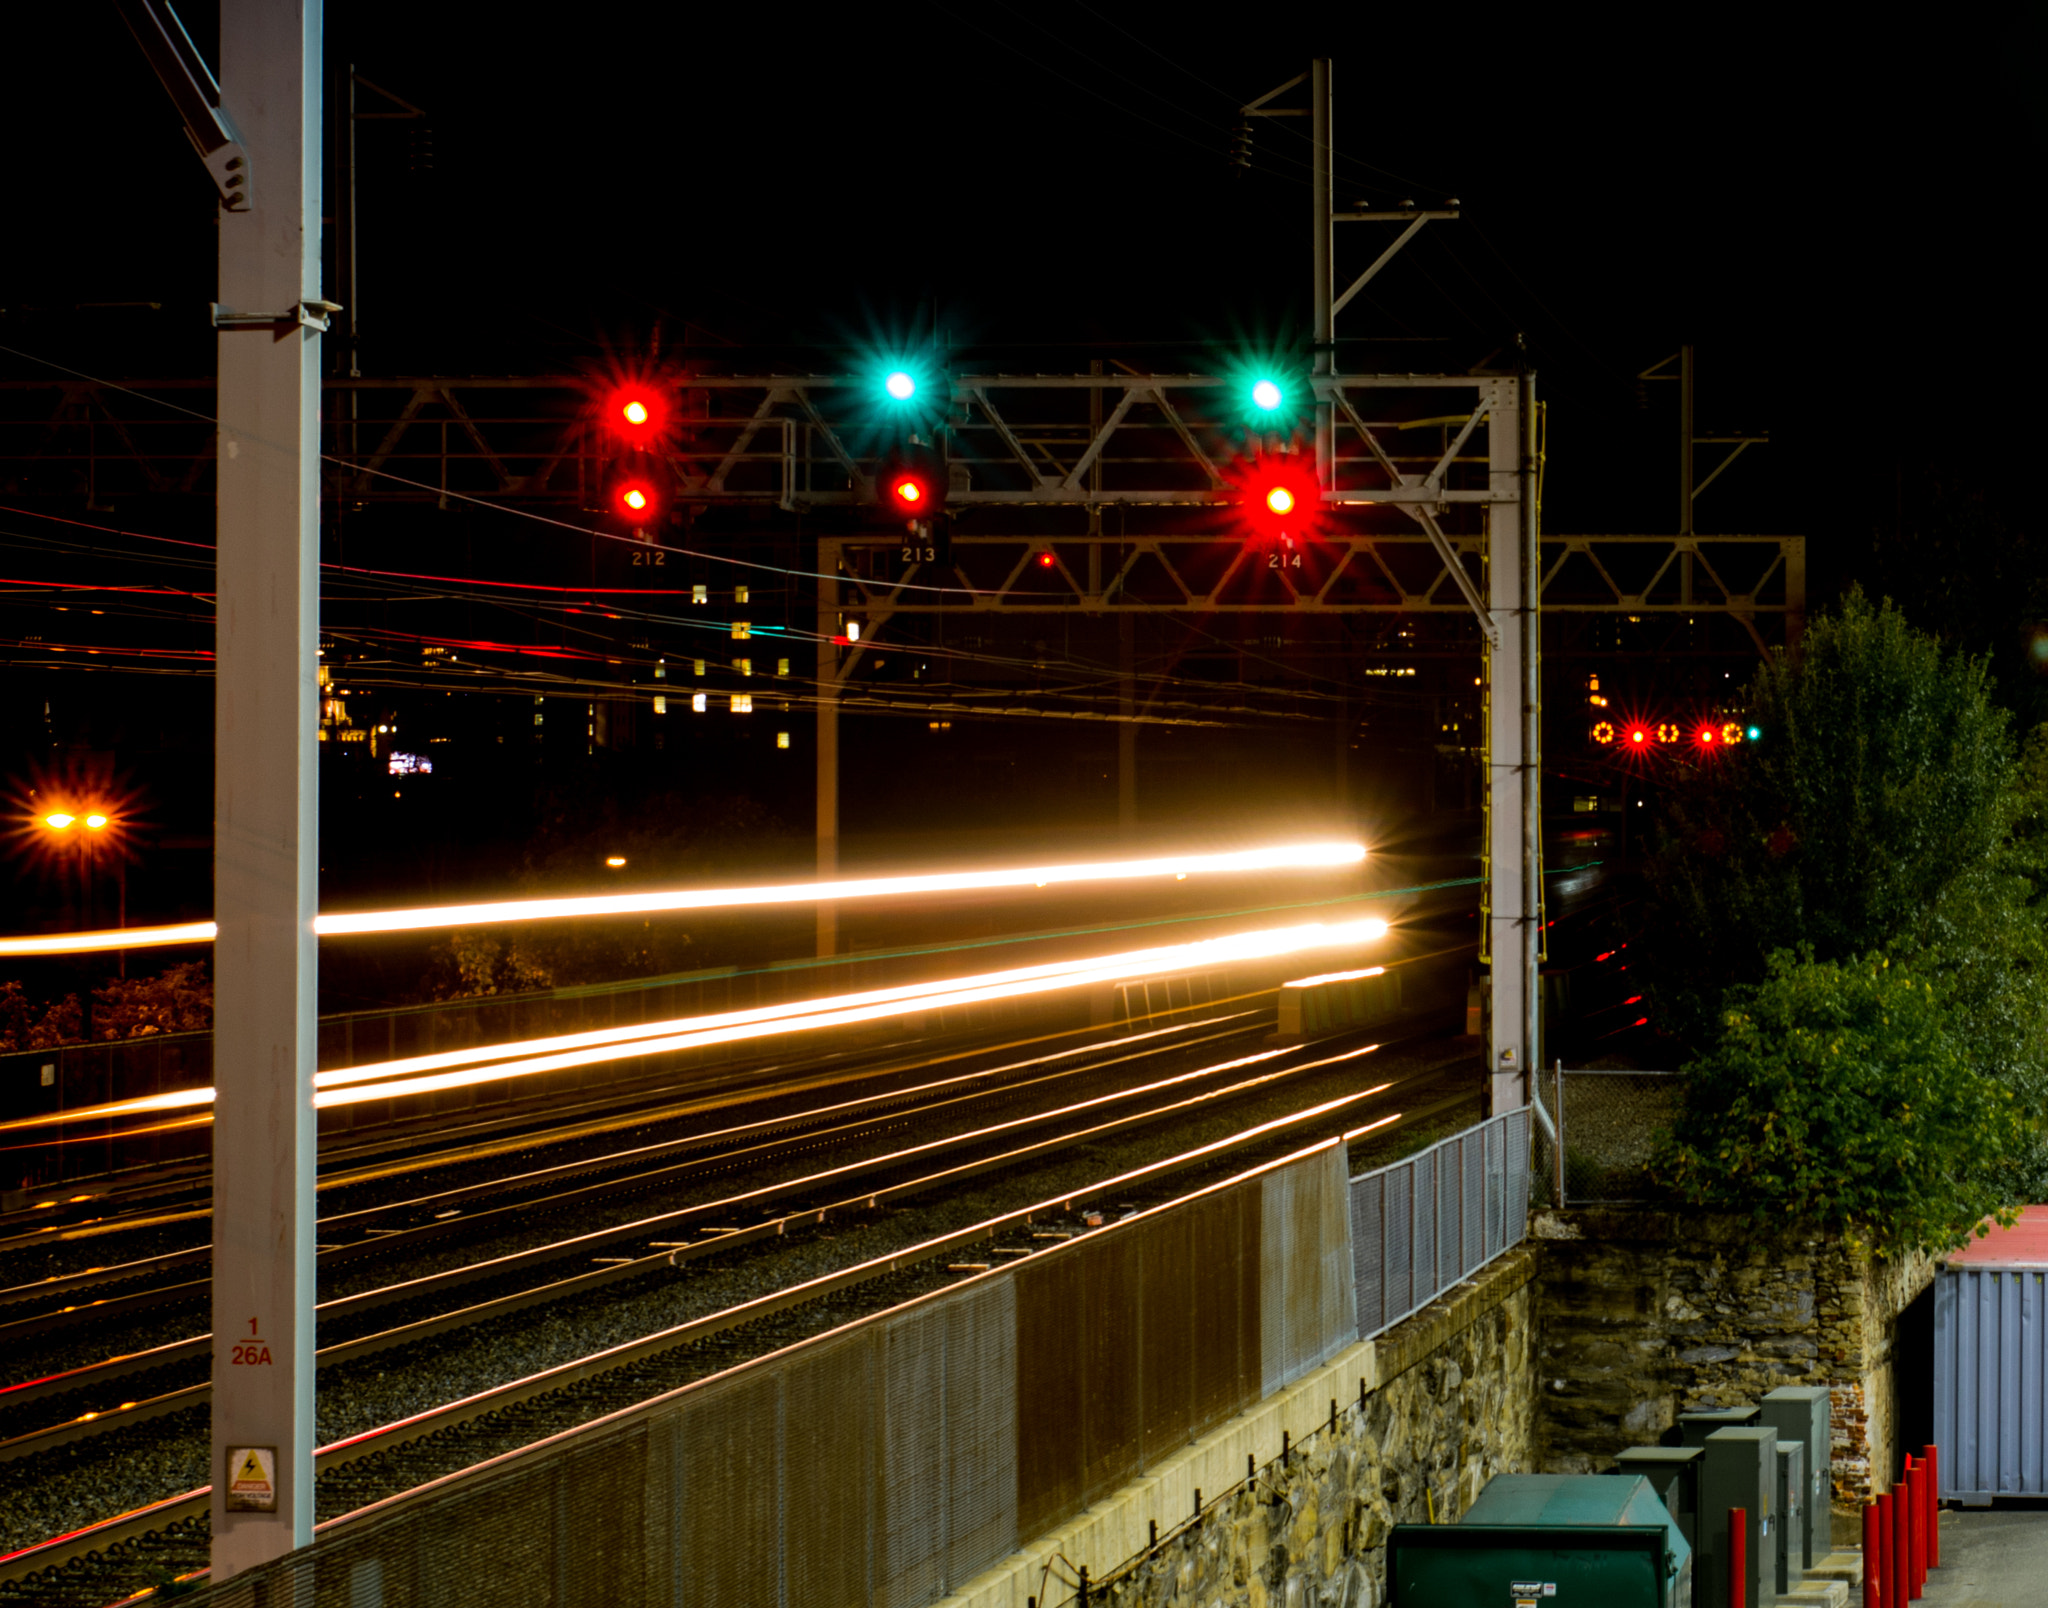 Pentax K-5 sample photo. The train that takes my breath away photography